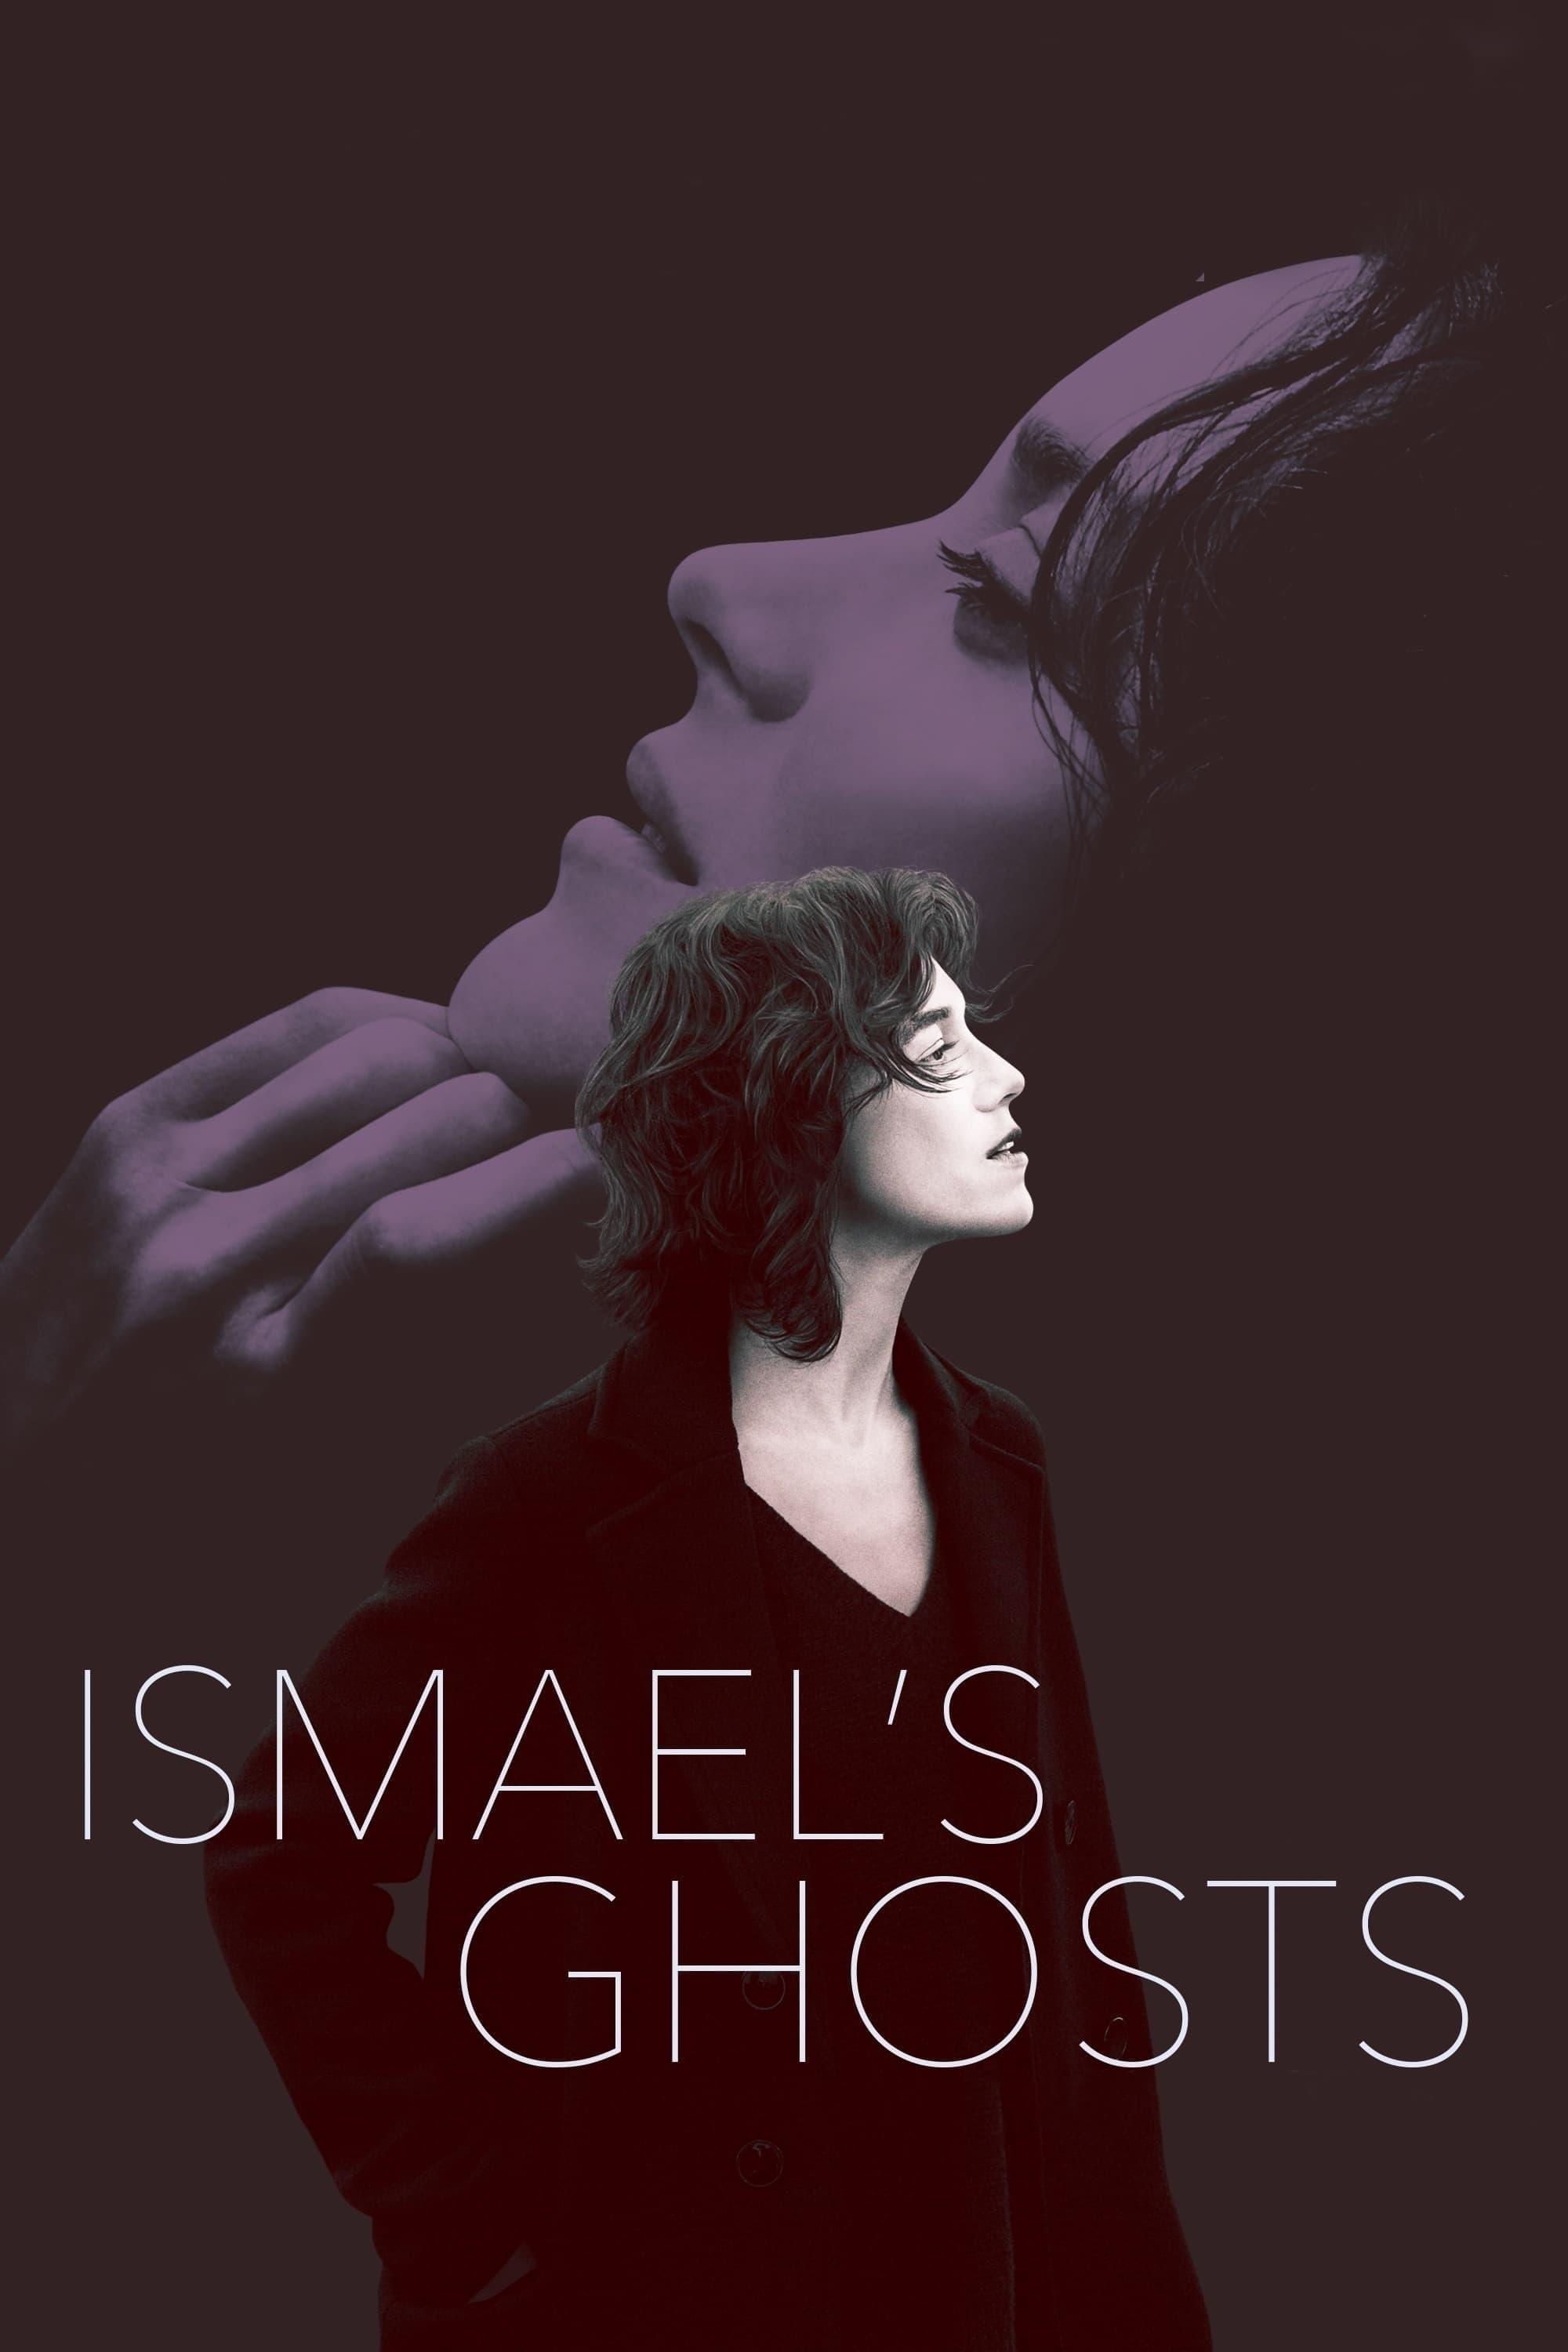 Ismael's Ghosts poster